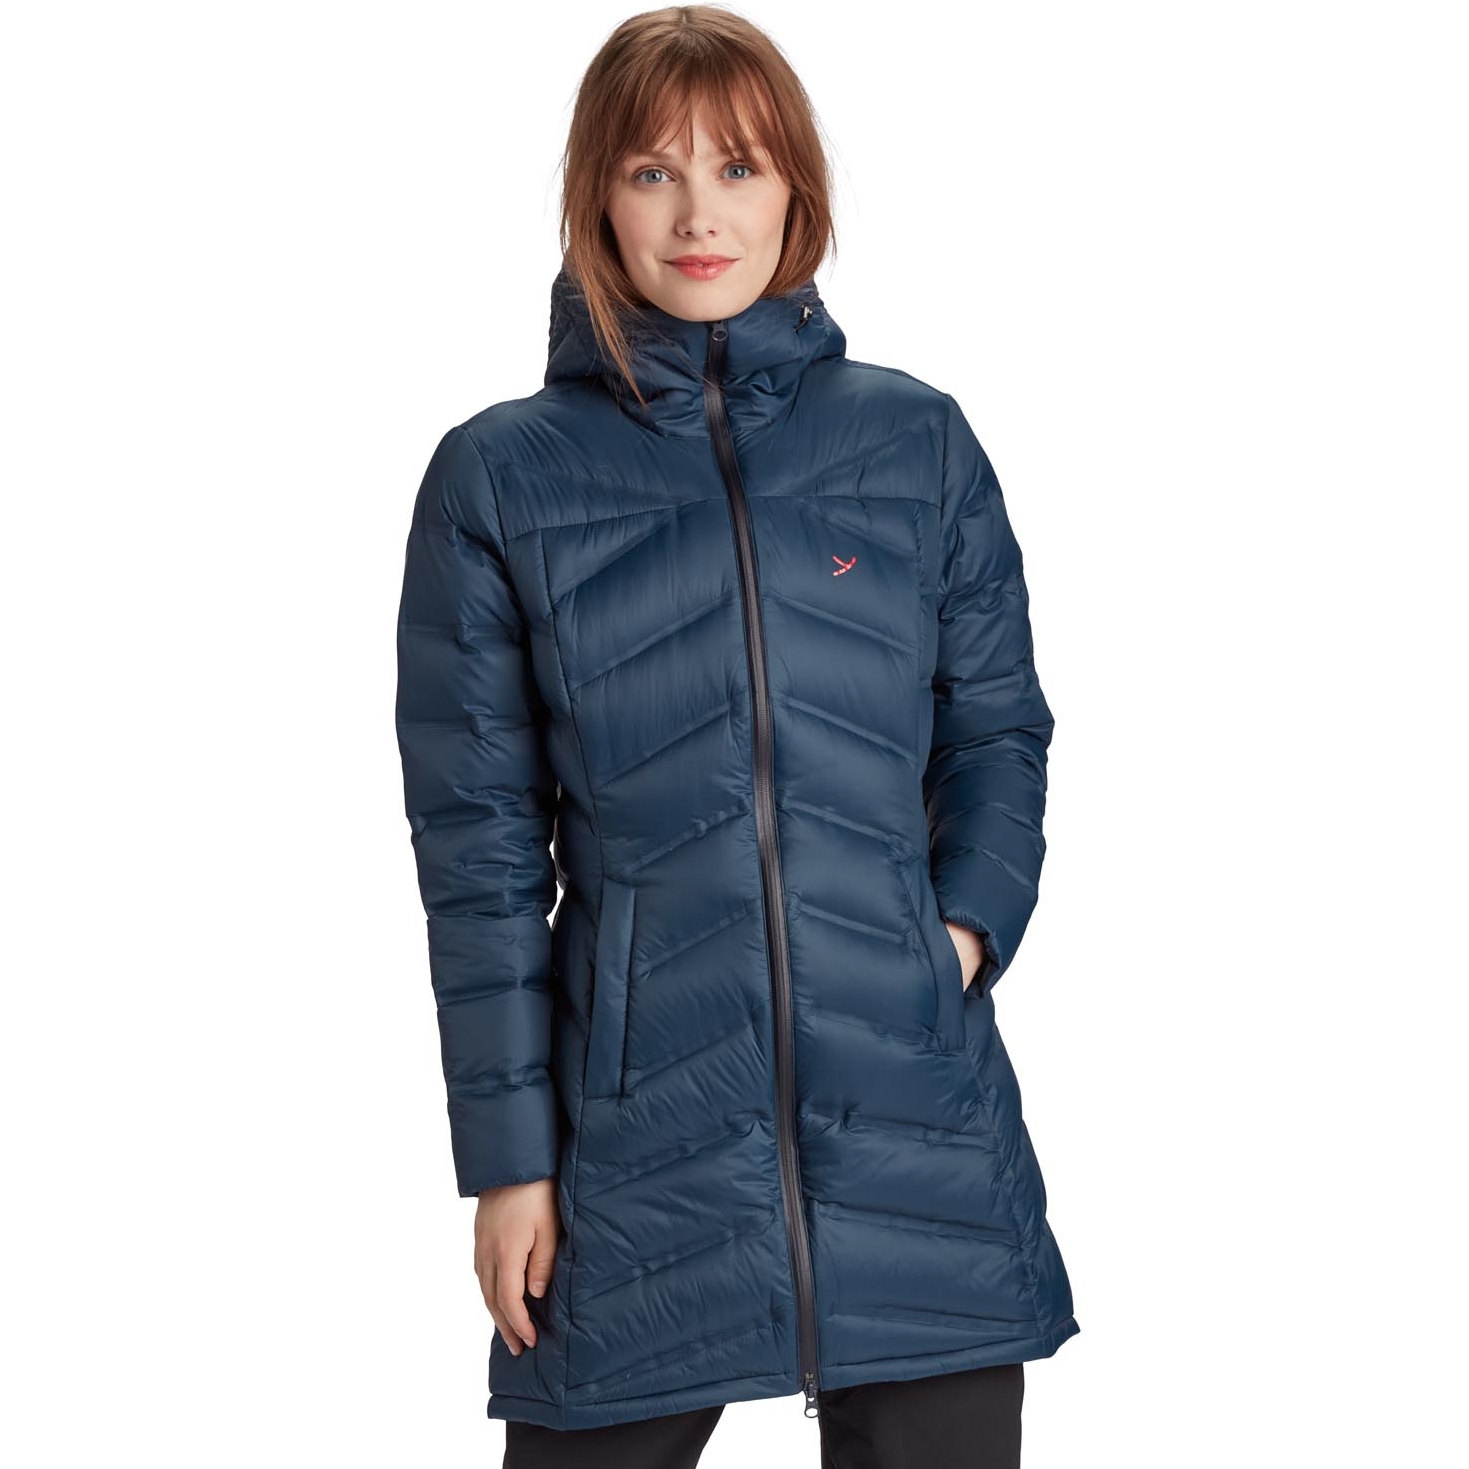 Picture of Y by Nordisk Patea Down Coat Women - dress blue